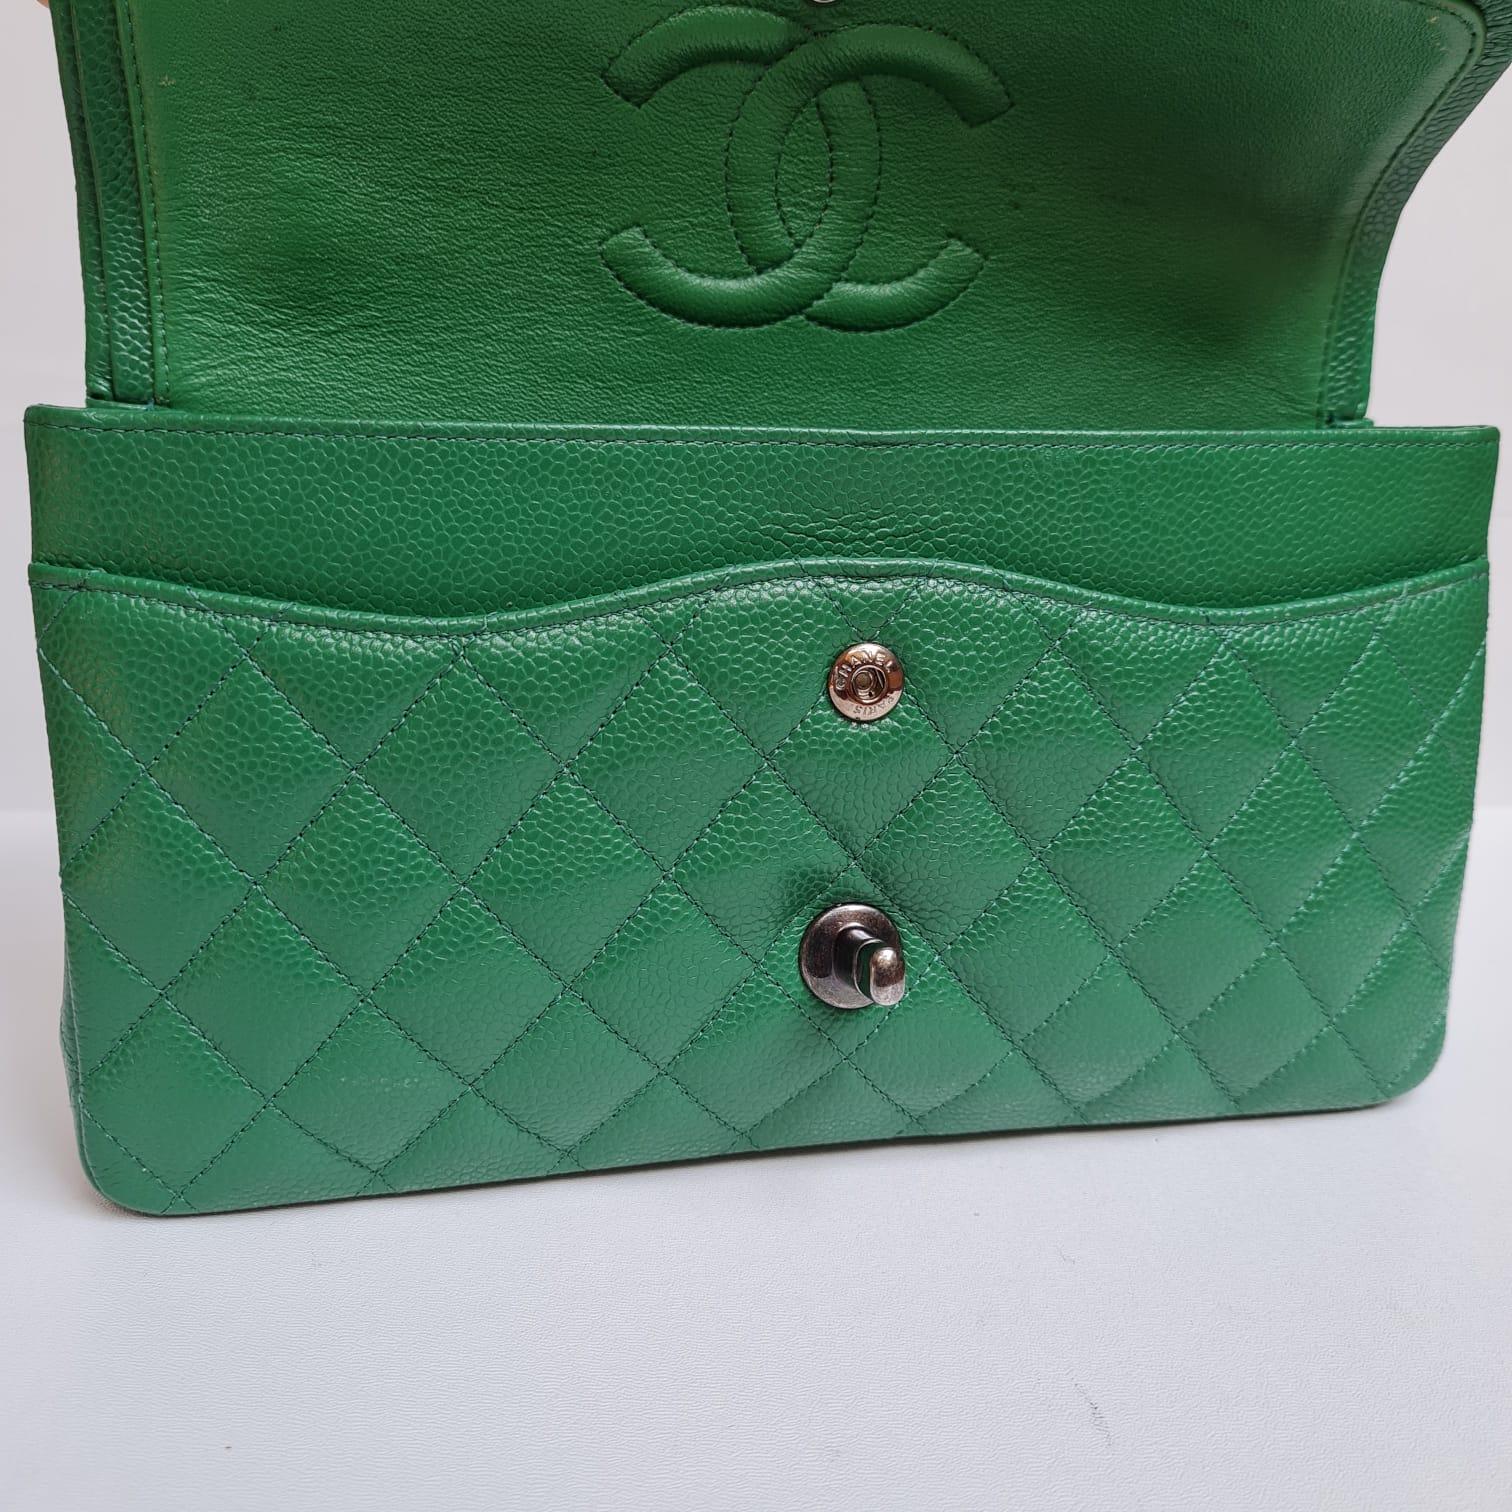 Rare Chanel Emerald Green Caviar Quilted Classic Medium Double Flap Bag RHW 4